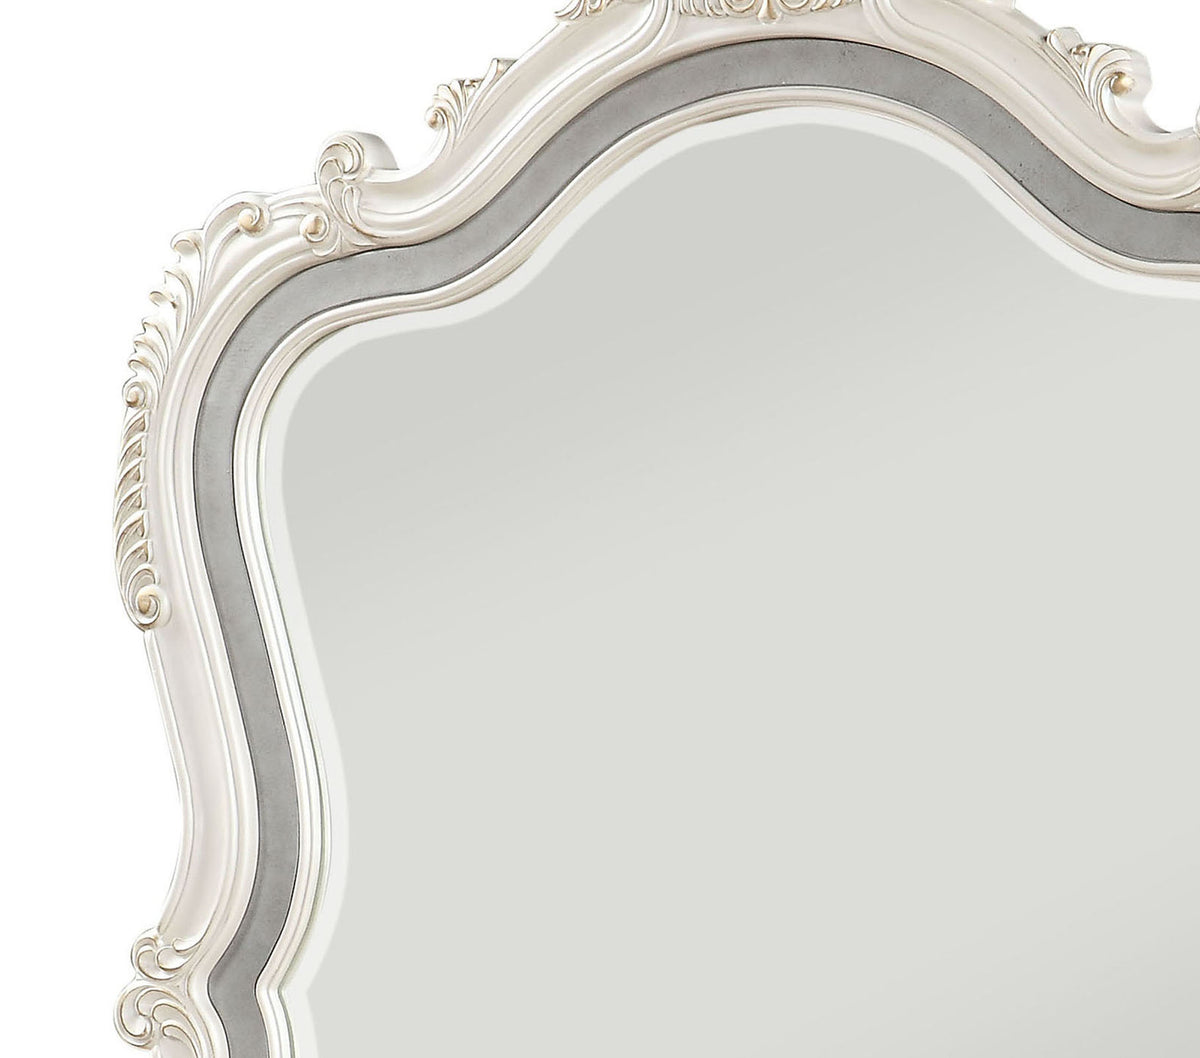 Traditional Mirror with Wooden Scrollwork Crown, White and Silver - BM205579